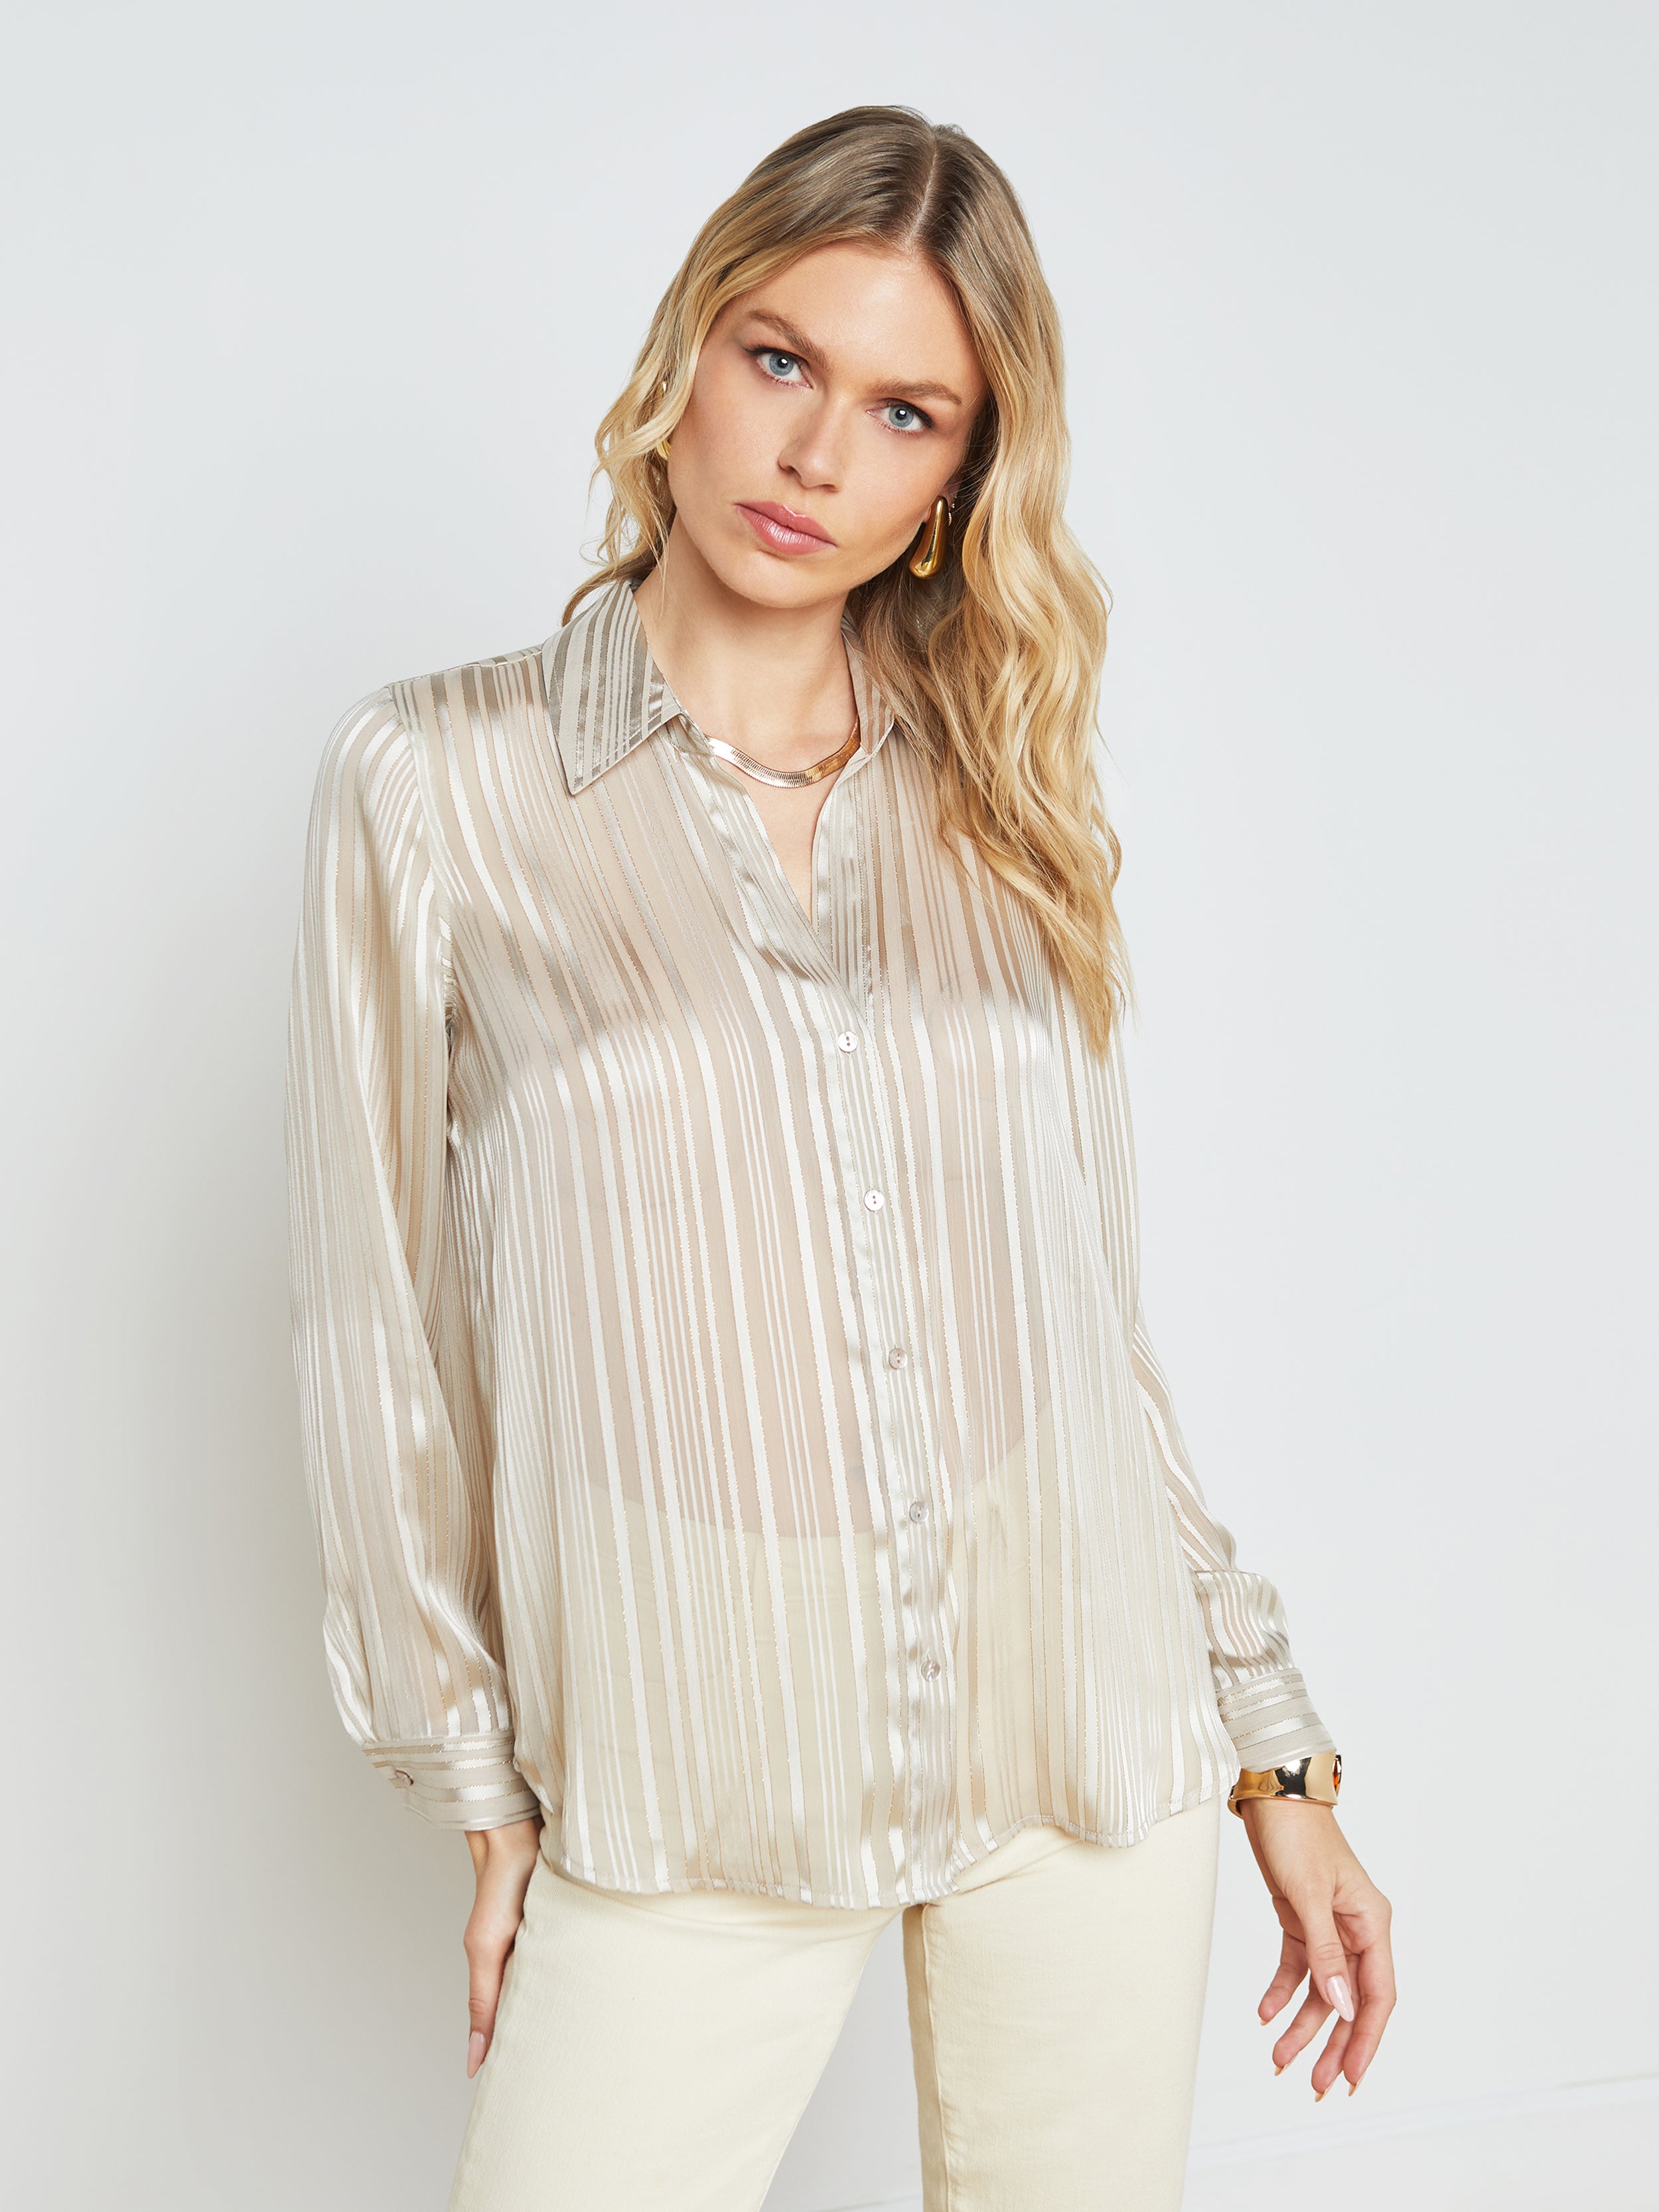 Featured: Argo Striped Blouse